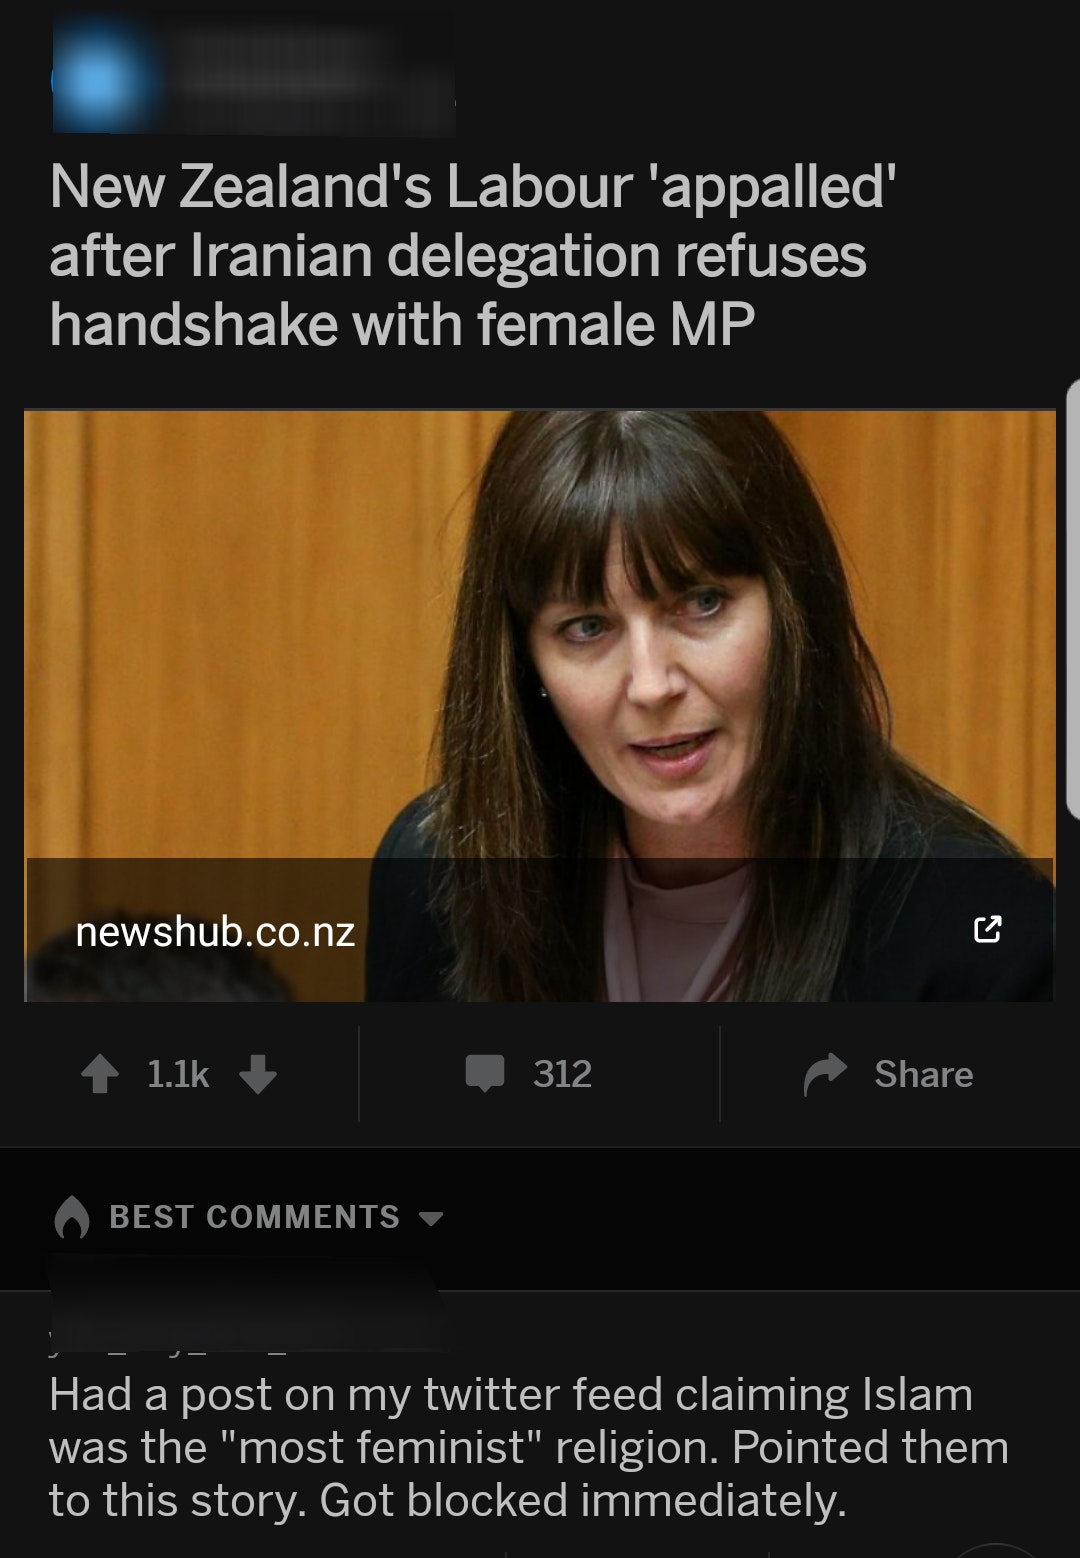 photo caption - New Zealand's Labour 'appalled' after Iranian delegation refuses handshake with female Mp newshub.co.nz 312 Best Had a post on my twitter feed claiming Islam was the "most feminist" religion. Pointed them to this story. Got blocked immedia